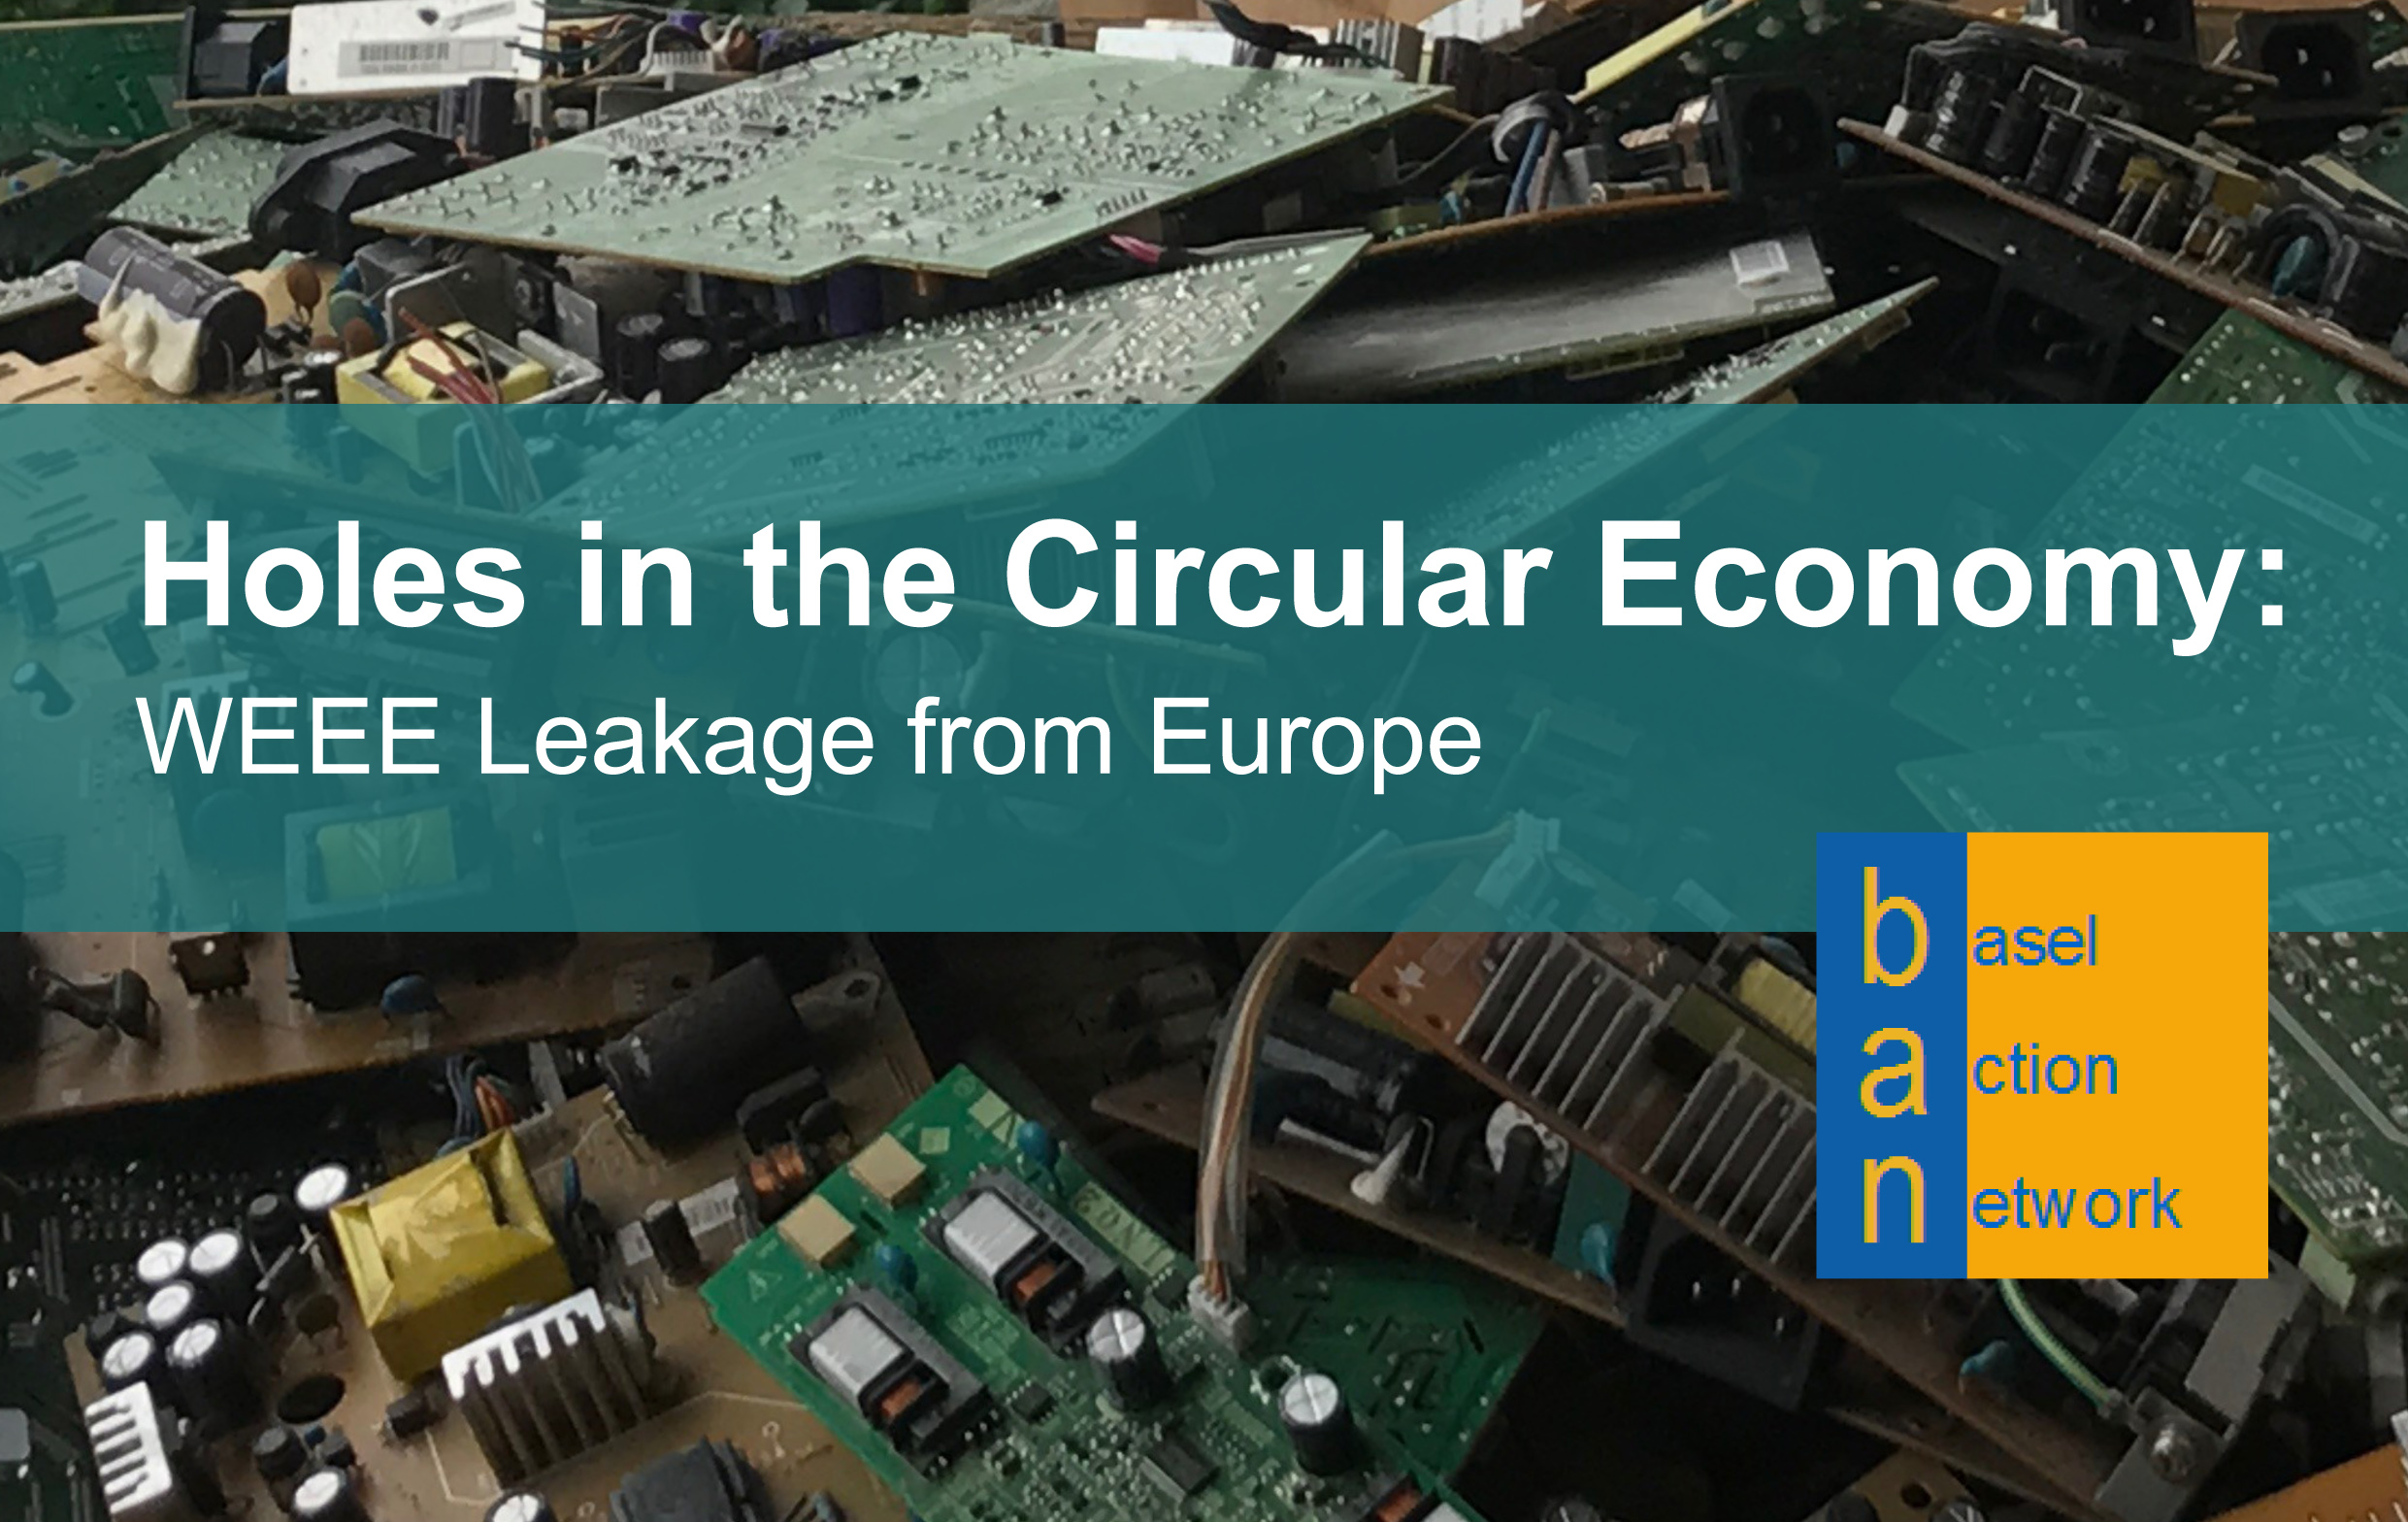 Holes in the circular economy - weee leakage from Europe